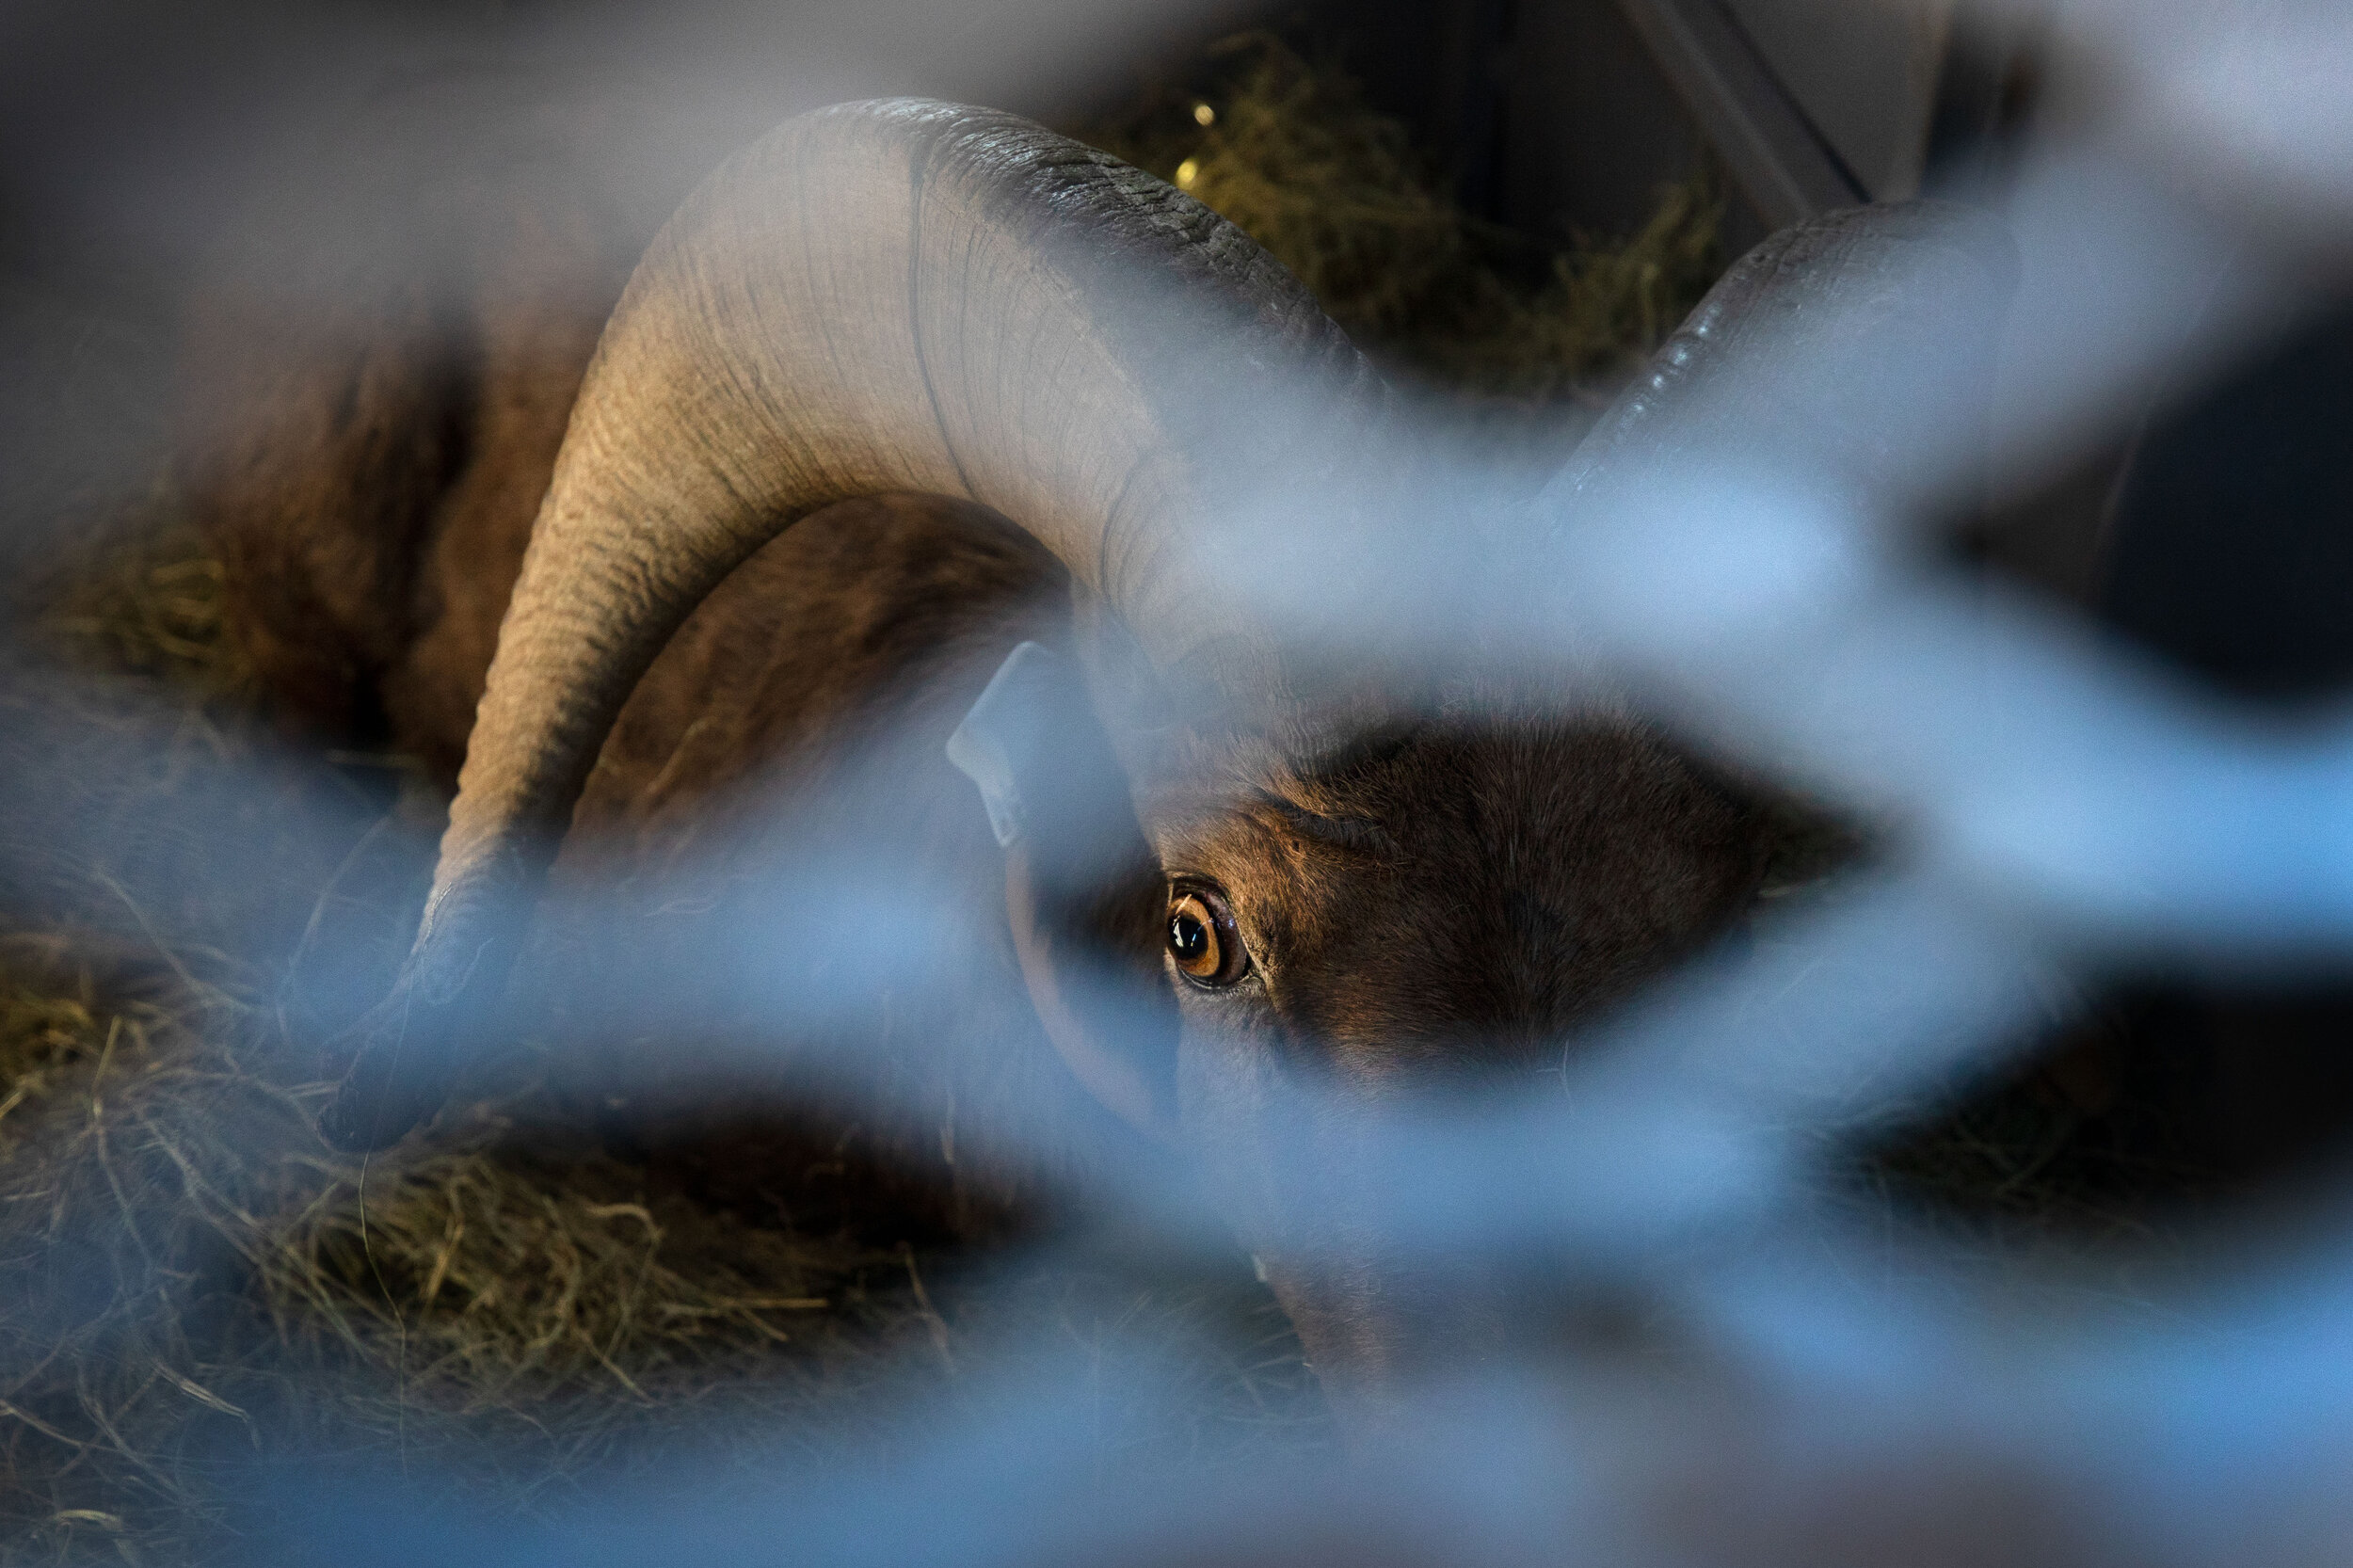  A sheep awaits its relocation inside one of four trailers. 